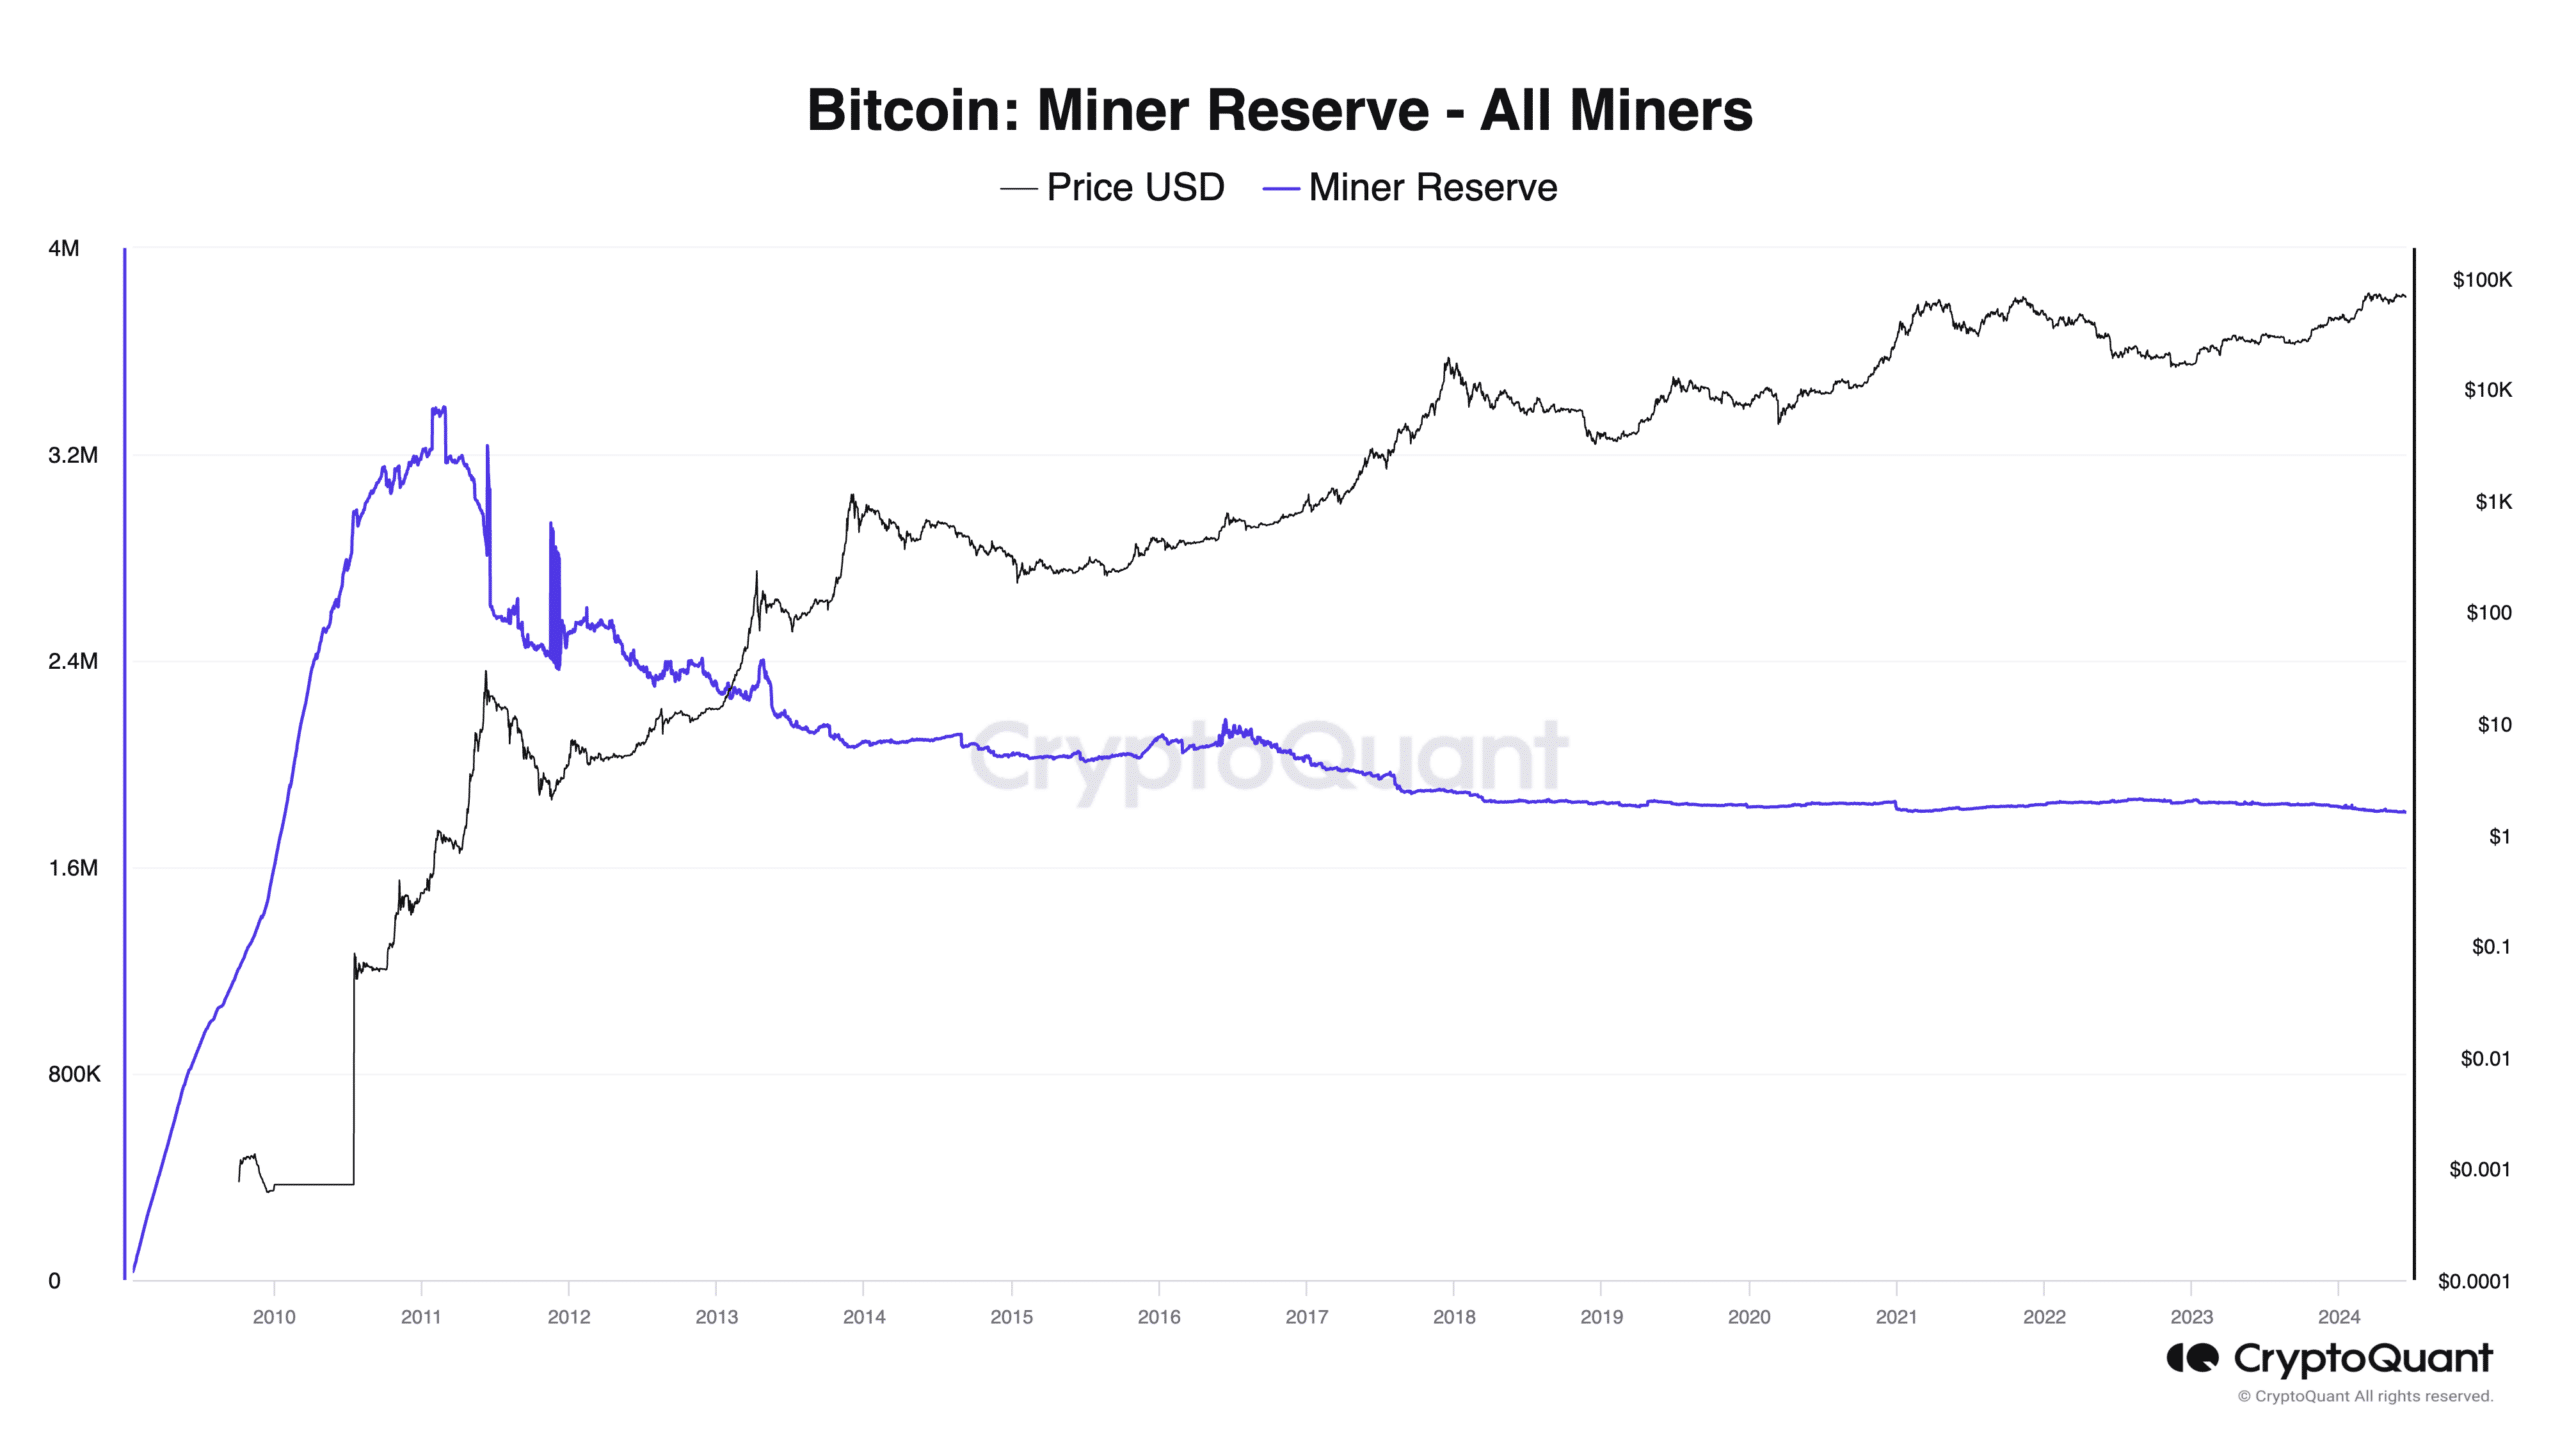 Bitcoin Miner Reserve - All Miners